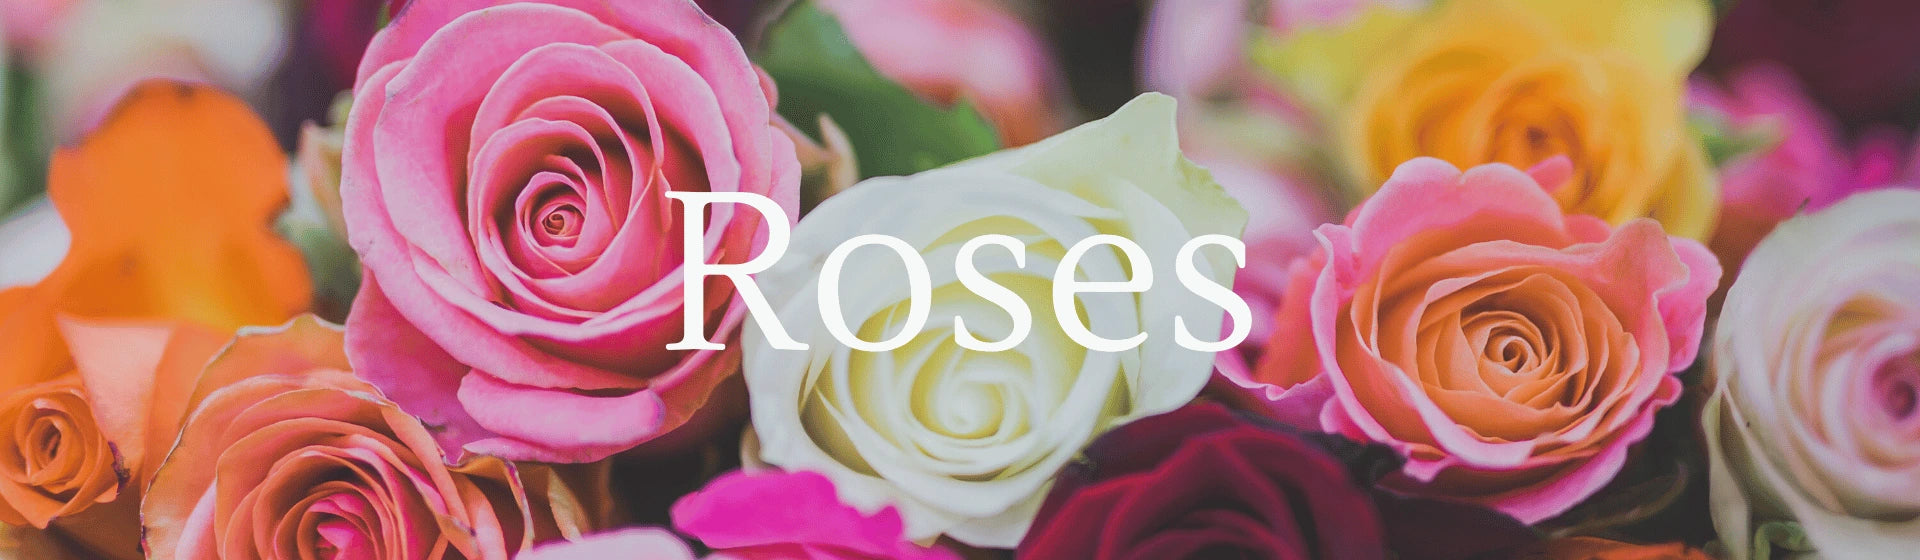 It is all about Roses